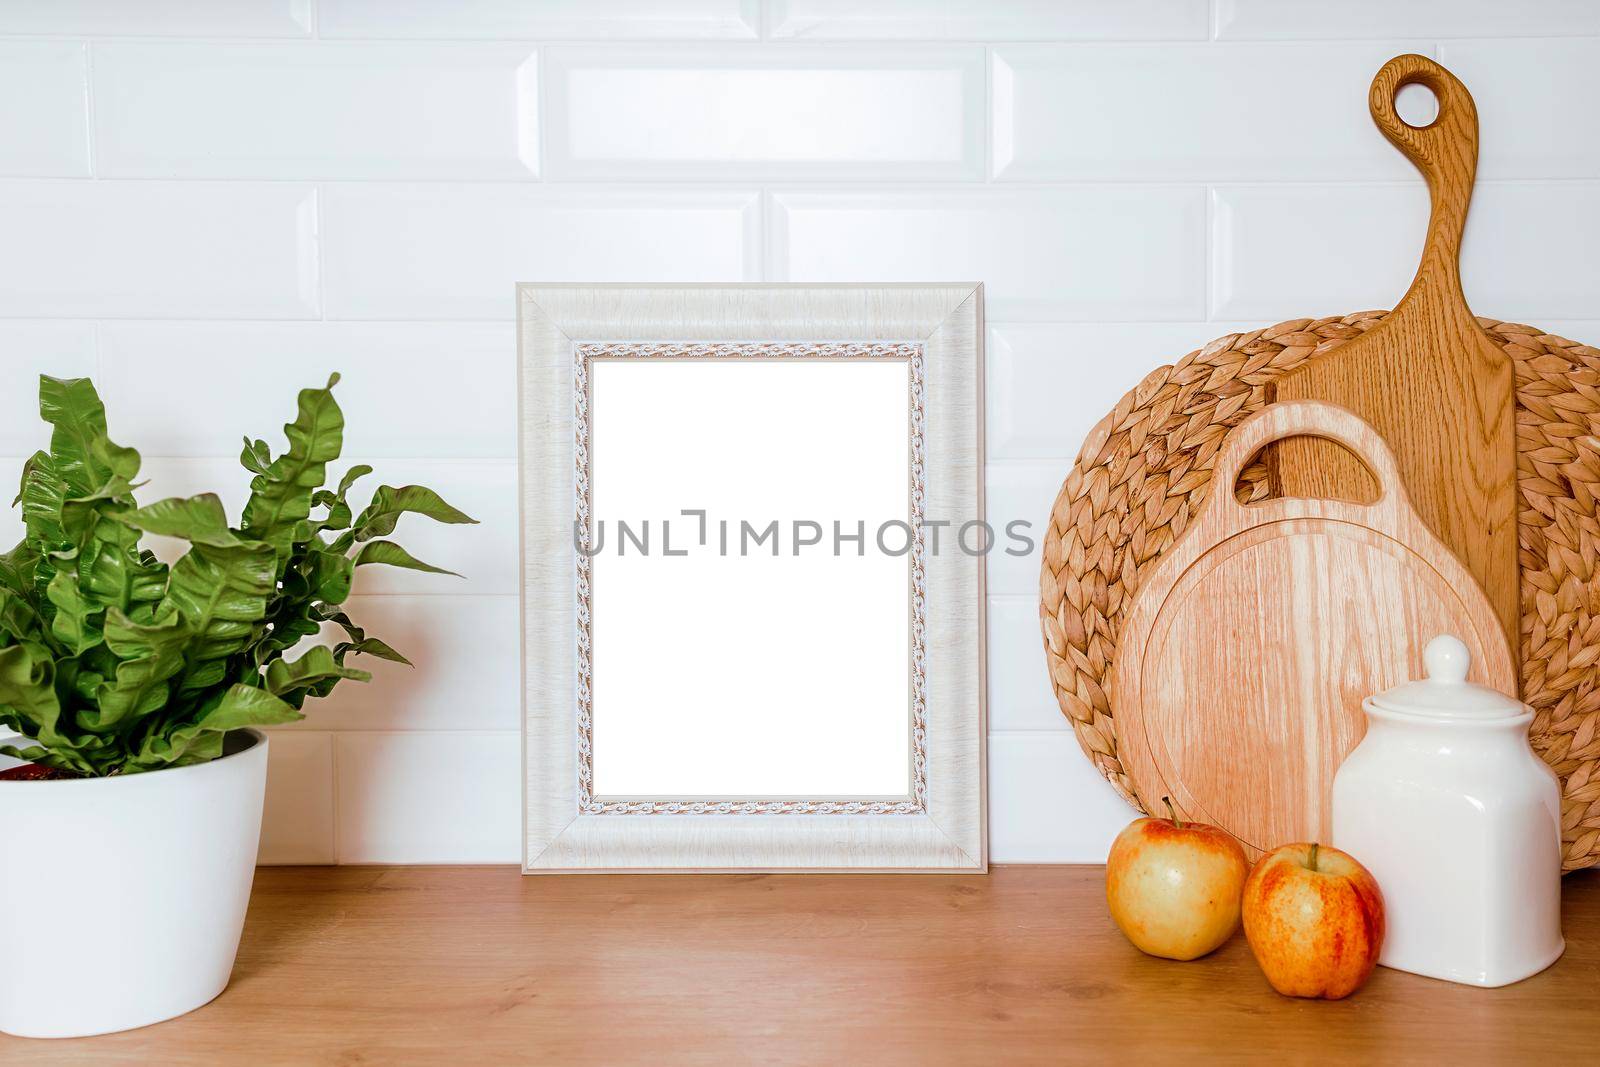 layout in vintage style. the concept of natural cuisine and healthy food. beautiful frame with a white sheet of paper, wooden boards for bread, fruits, homemade flowers and ceramic dishes, copy paste